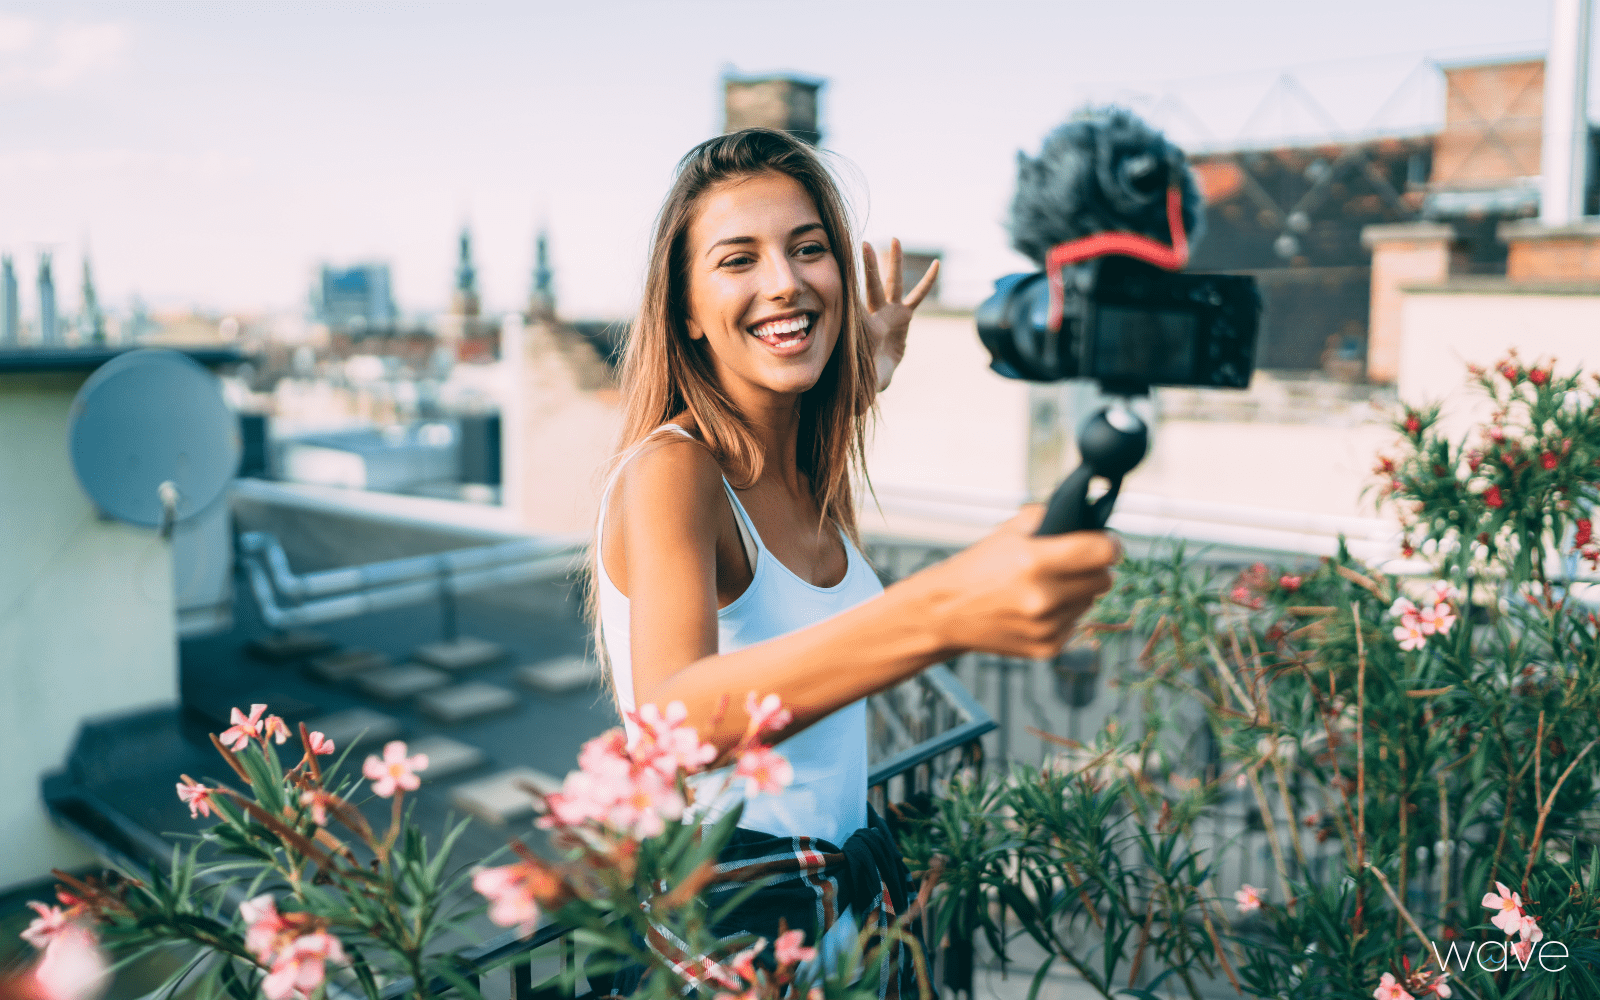 social media influencer filming on a rooftop